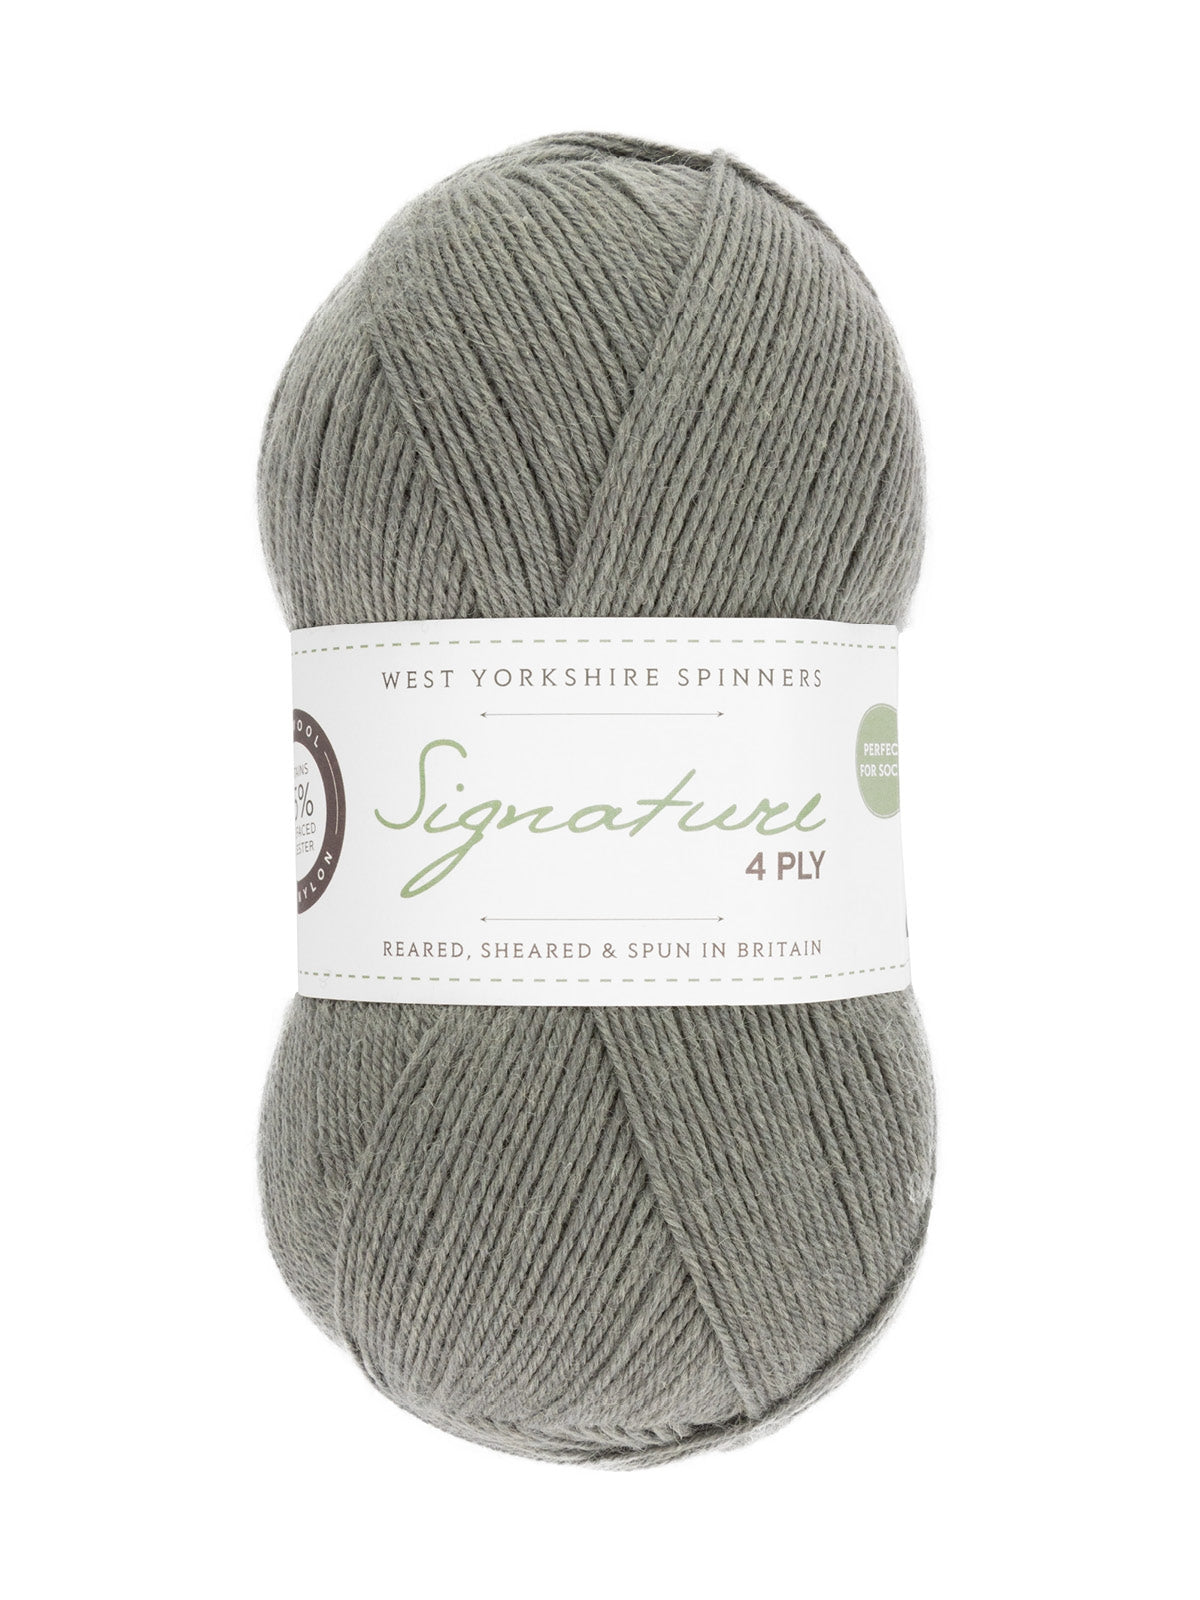 West Yorkshire Spinners Signature 4-Ply - Poppy Seed